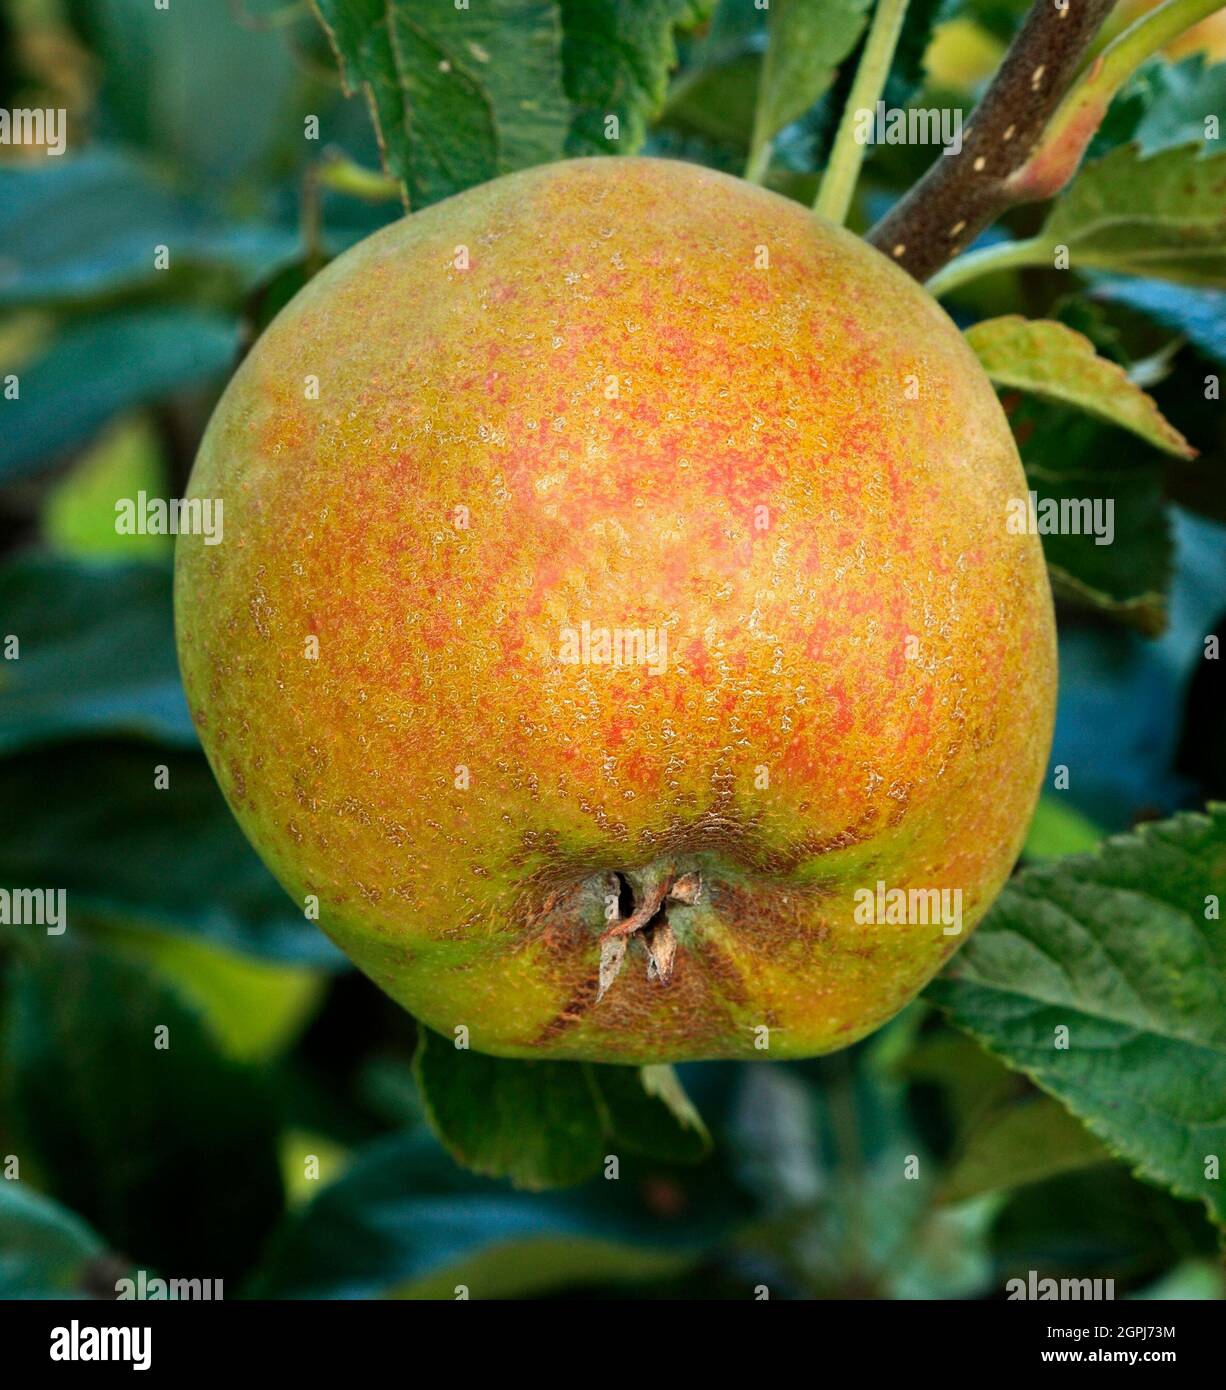 Apple 'D'Arcy Spice',  growing on tree, apples, malus domestica, healthy eating Stock Photo